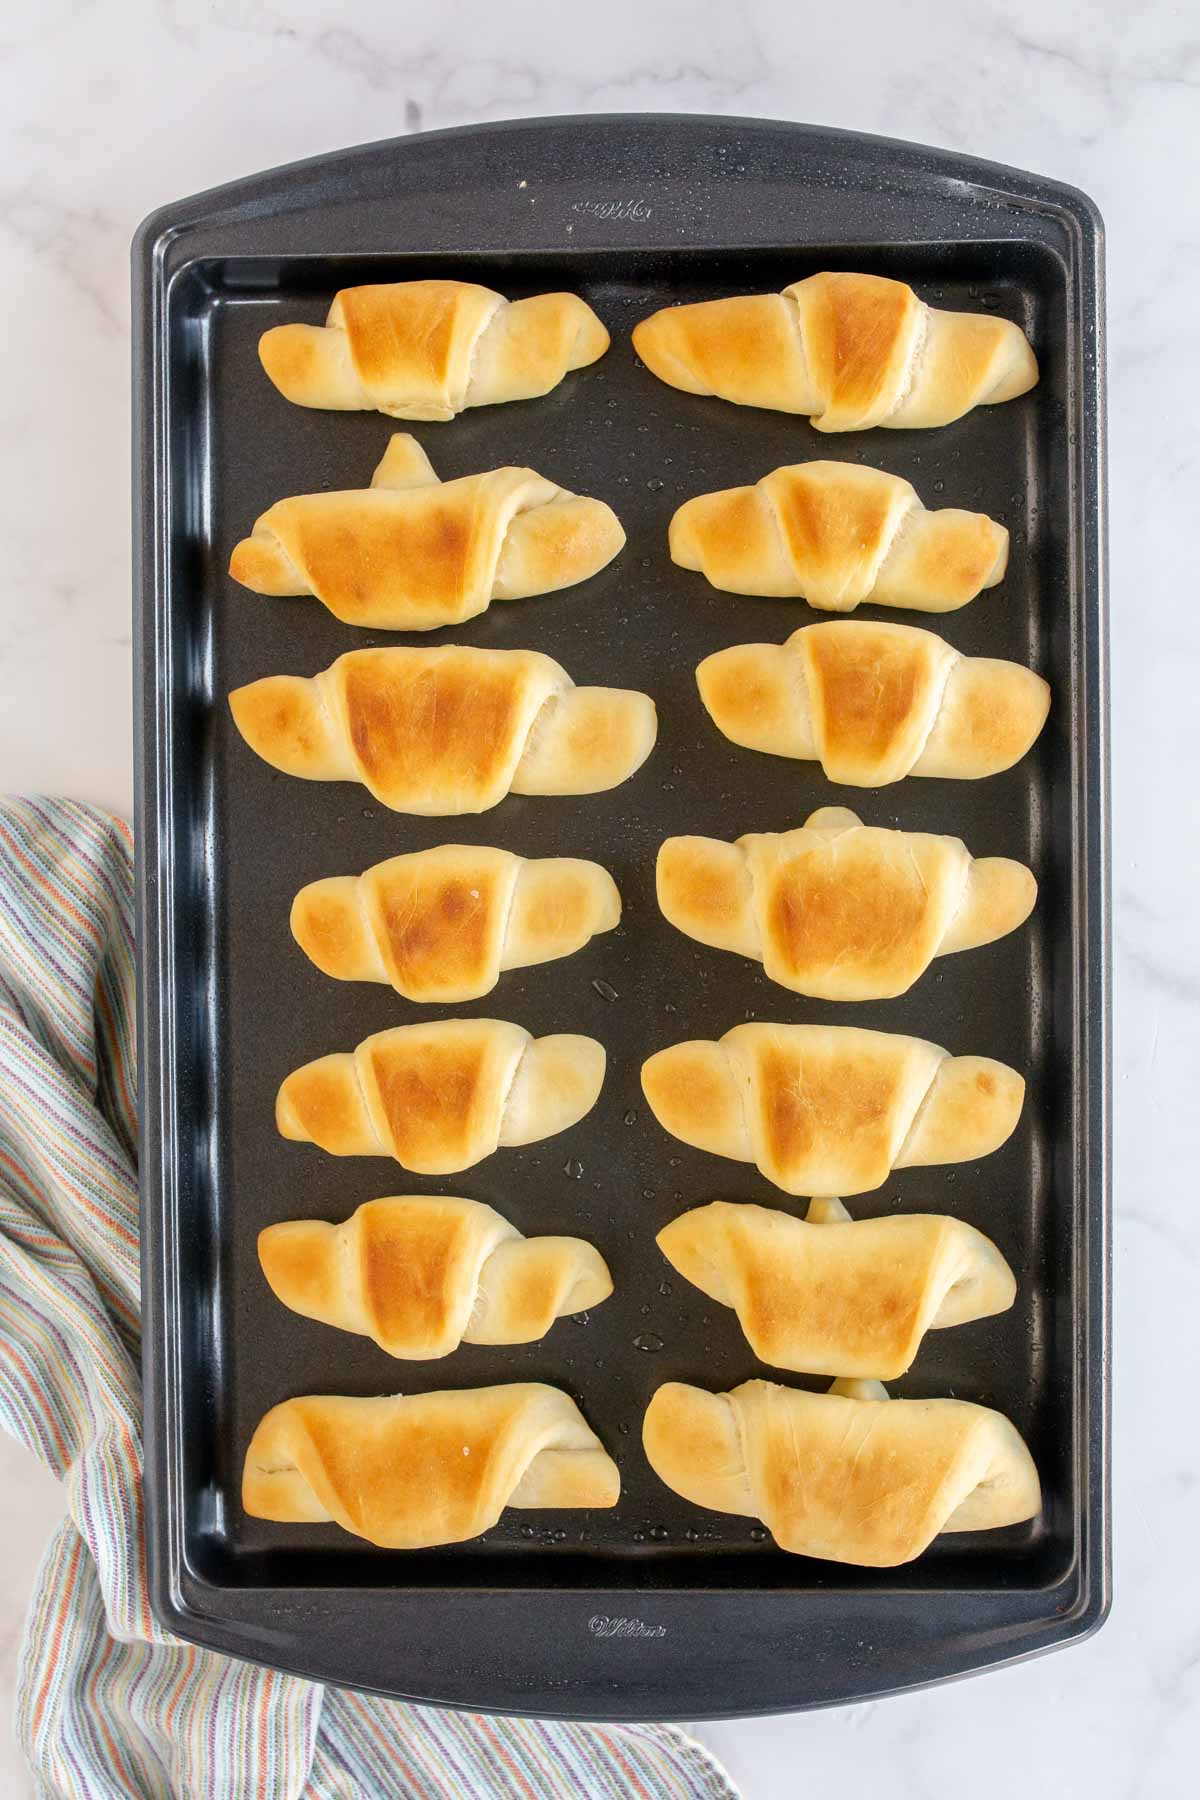 Tray of homemade crescent rolls on a baking sheet